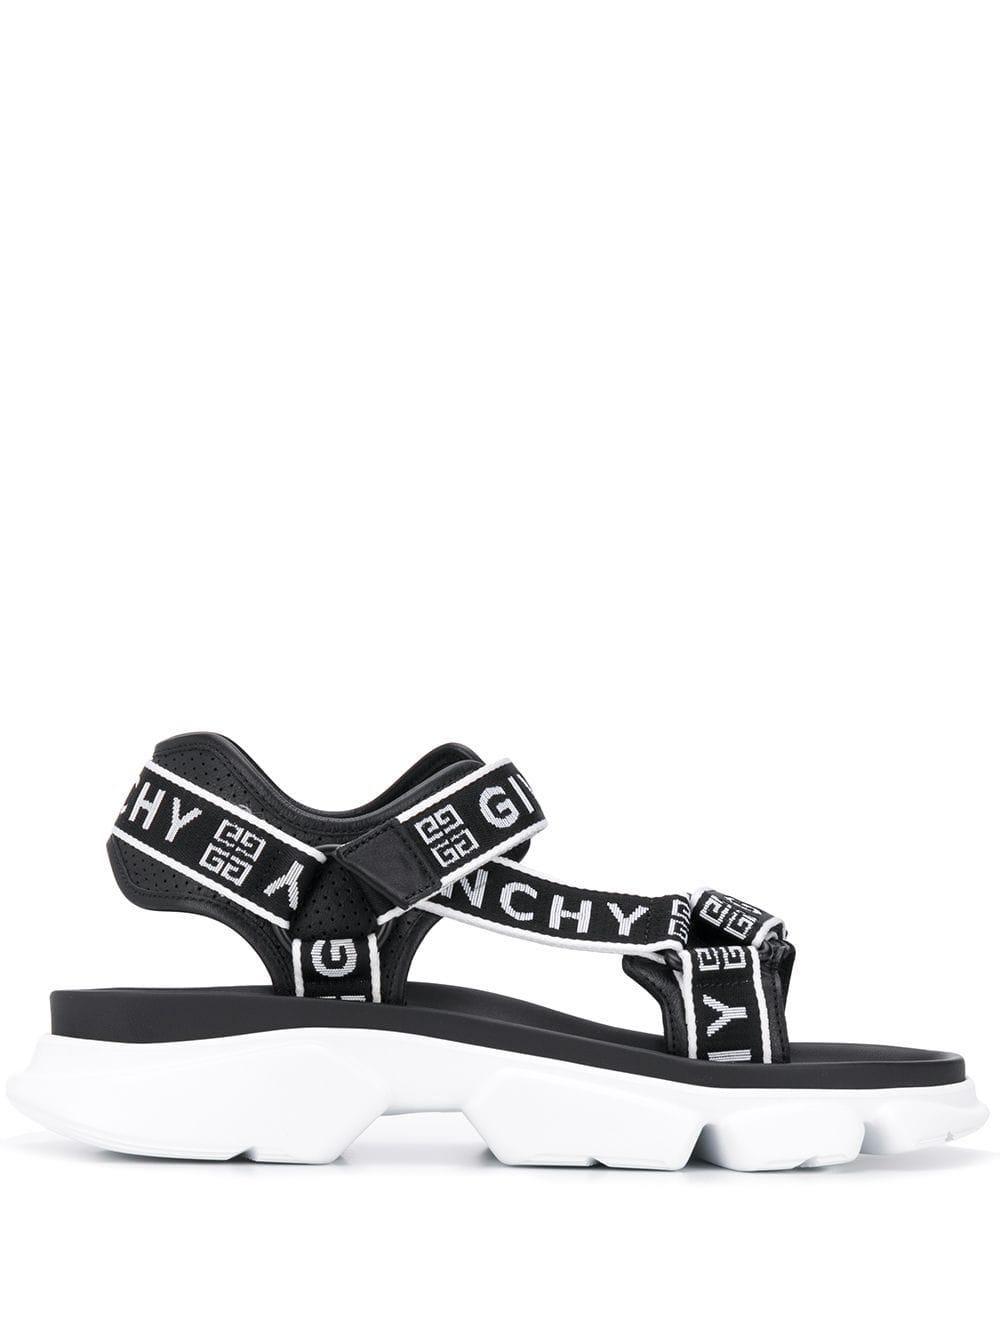 Givenchy Jaw Sandals in Black/White (Black) for Men - Lyst